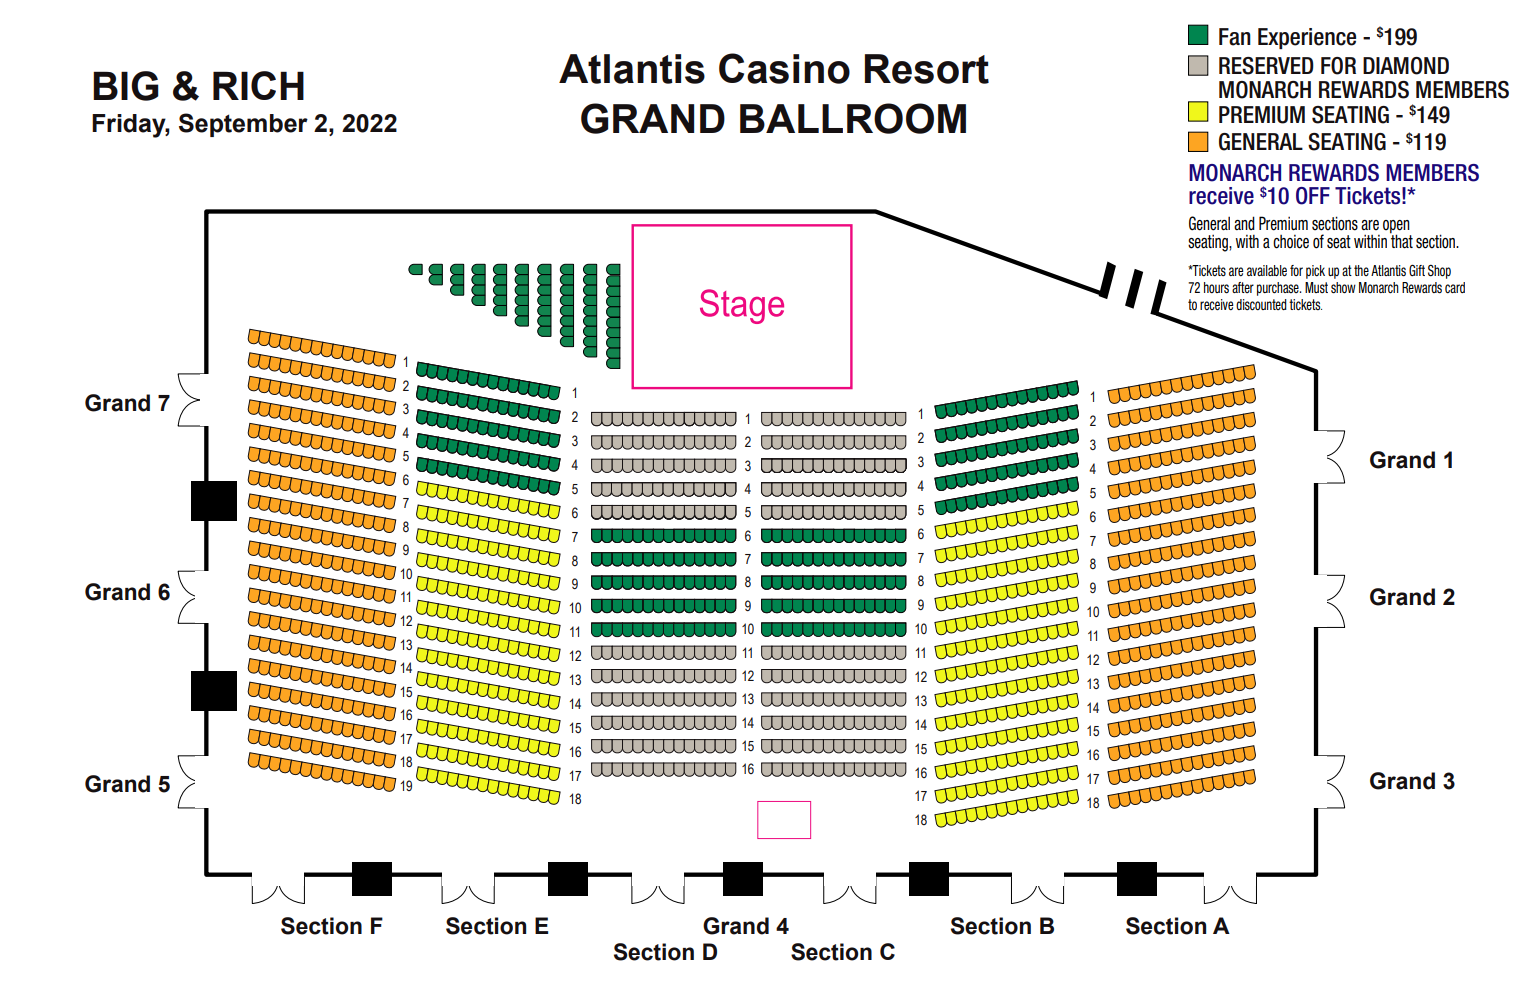 Seating Chart for Big & Rich